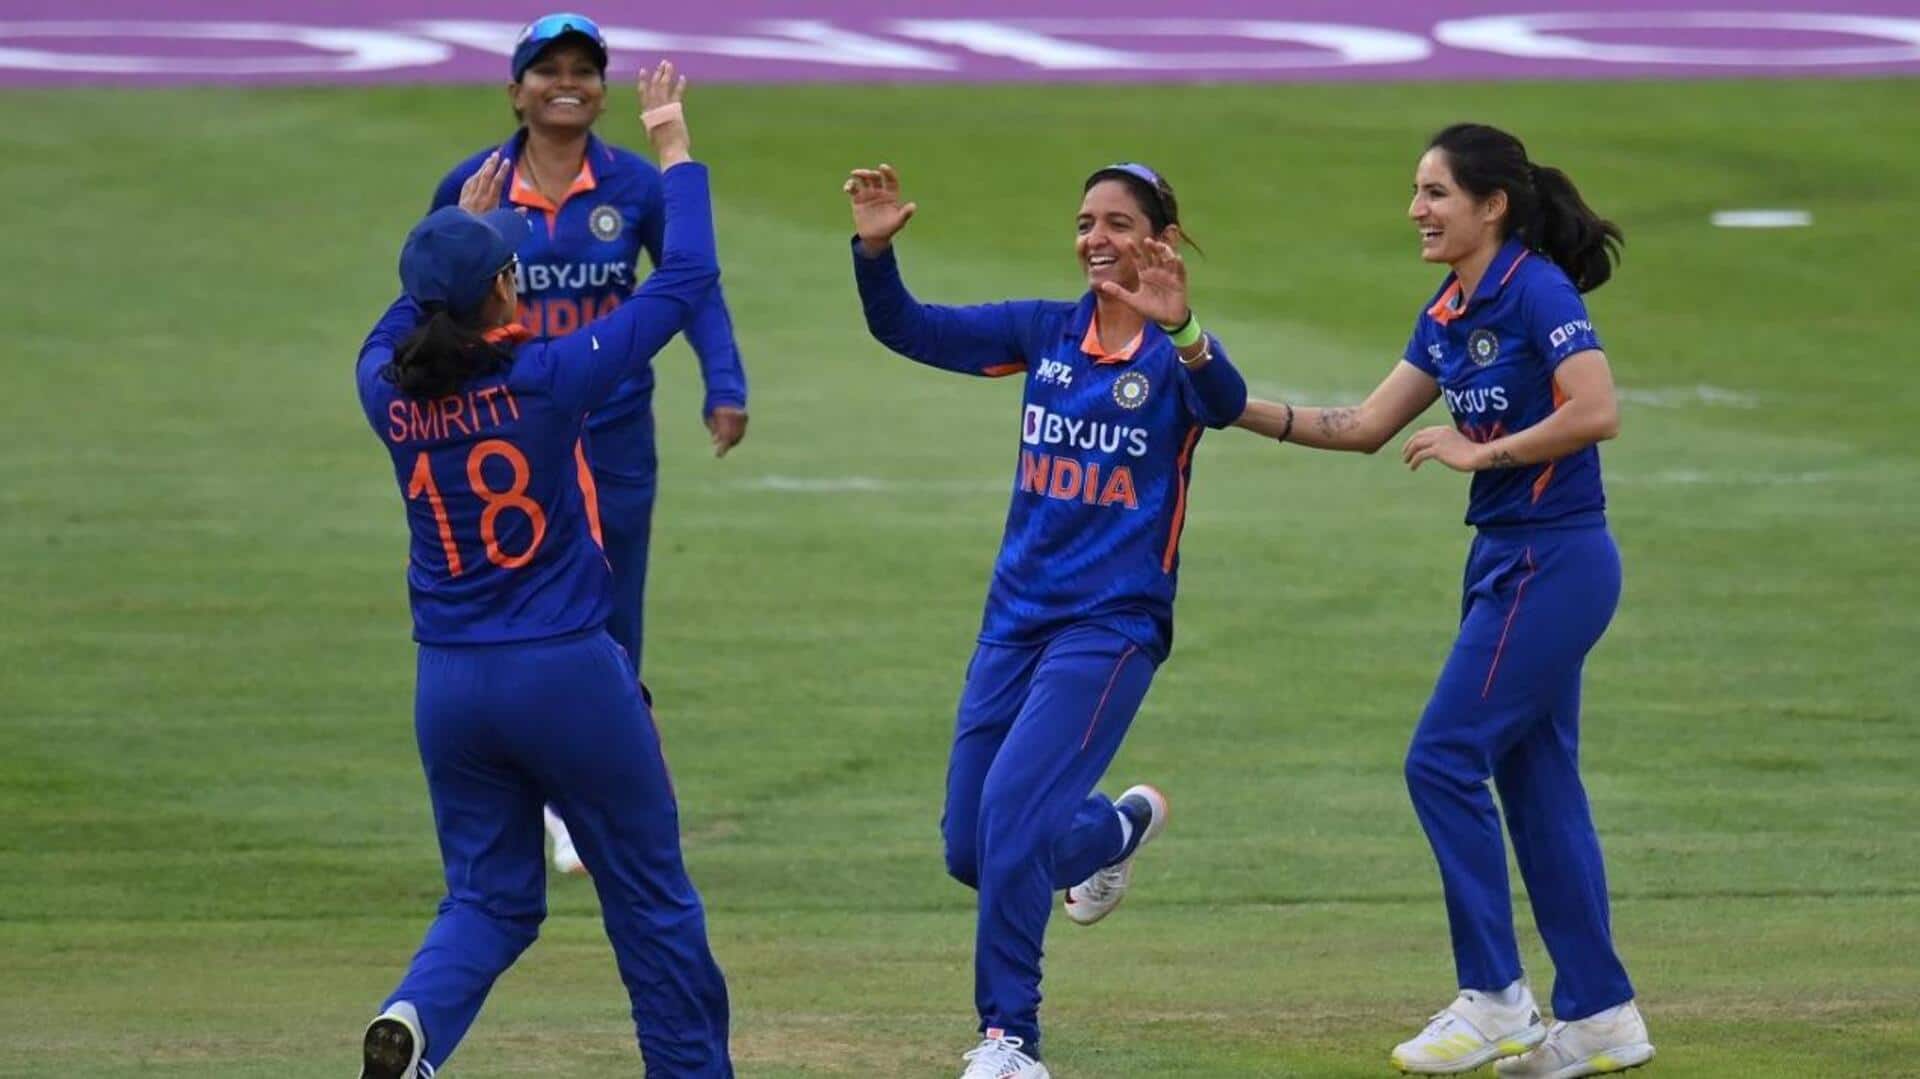 Asian Games 2023: Key details about the women's cricket event